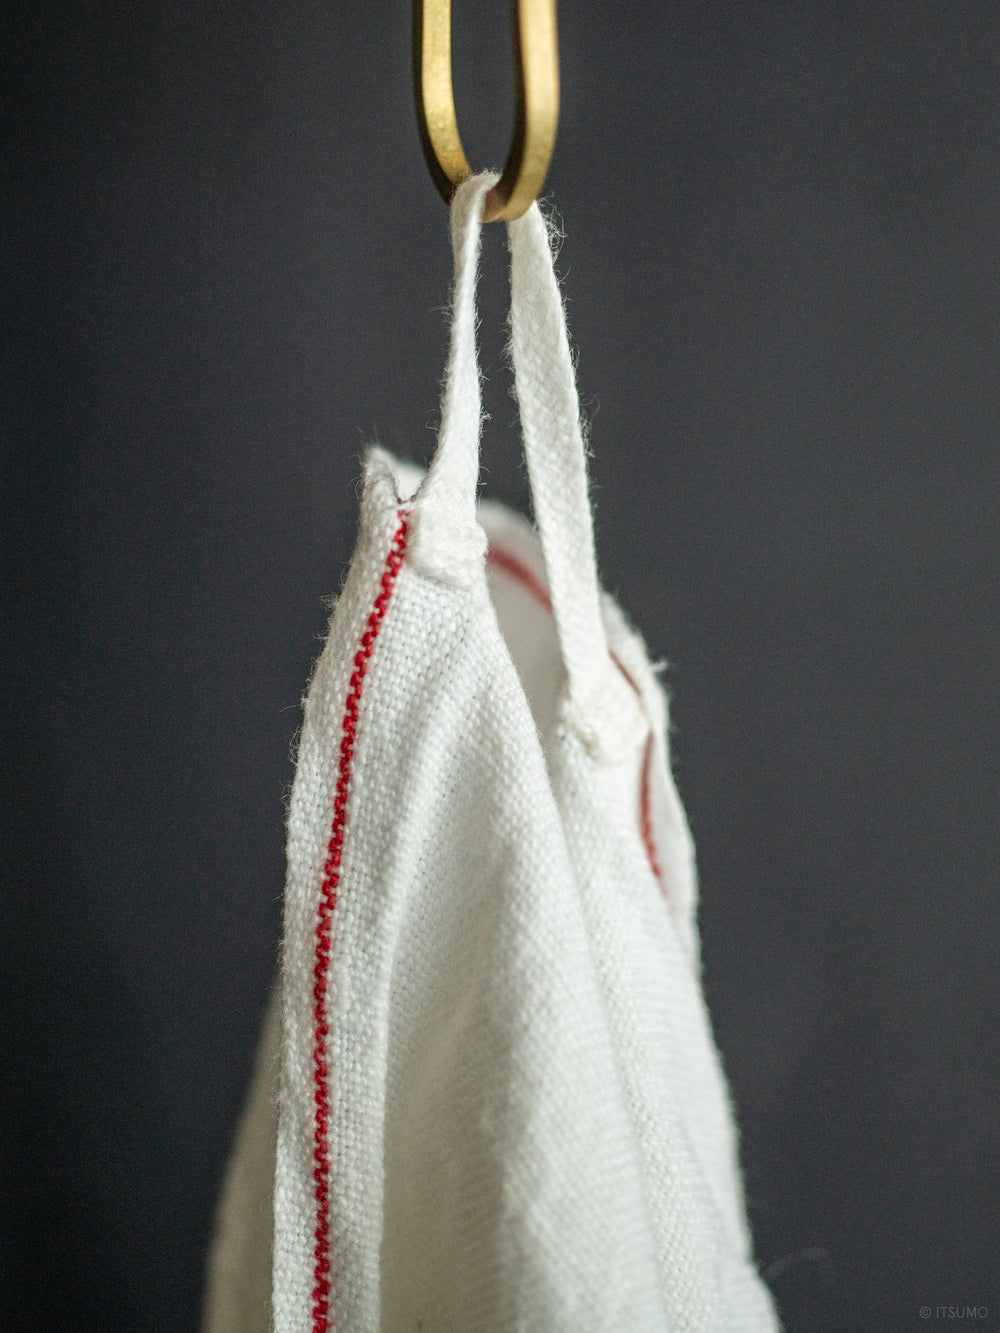 Azmaya white azabu linen hand towel with a red stripe along the edge, hanging from a hook